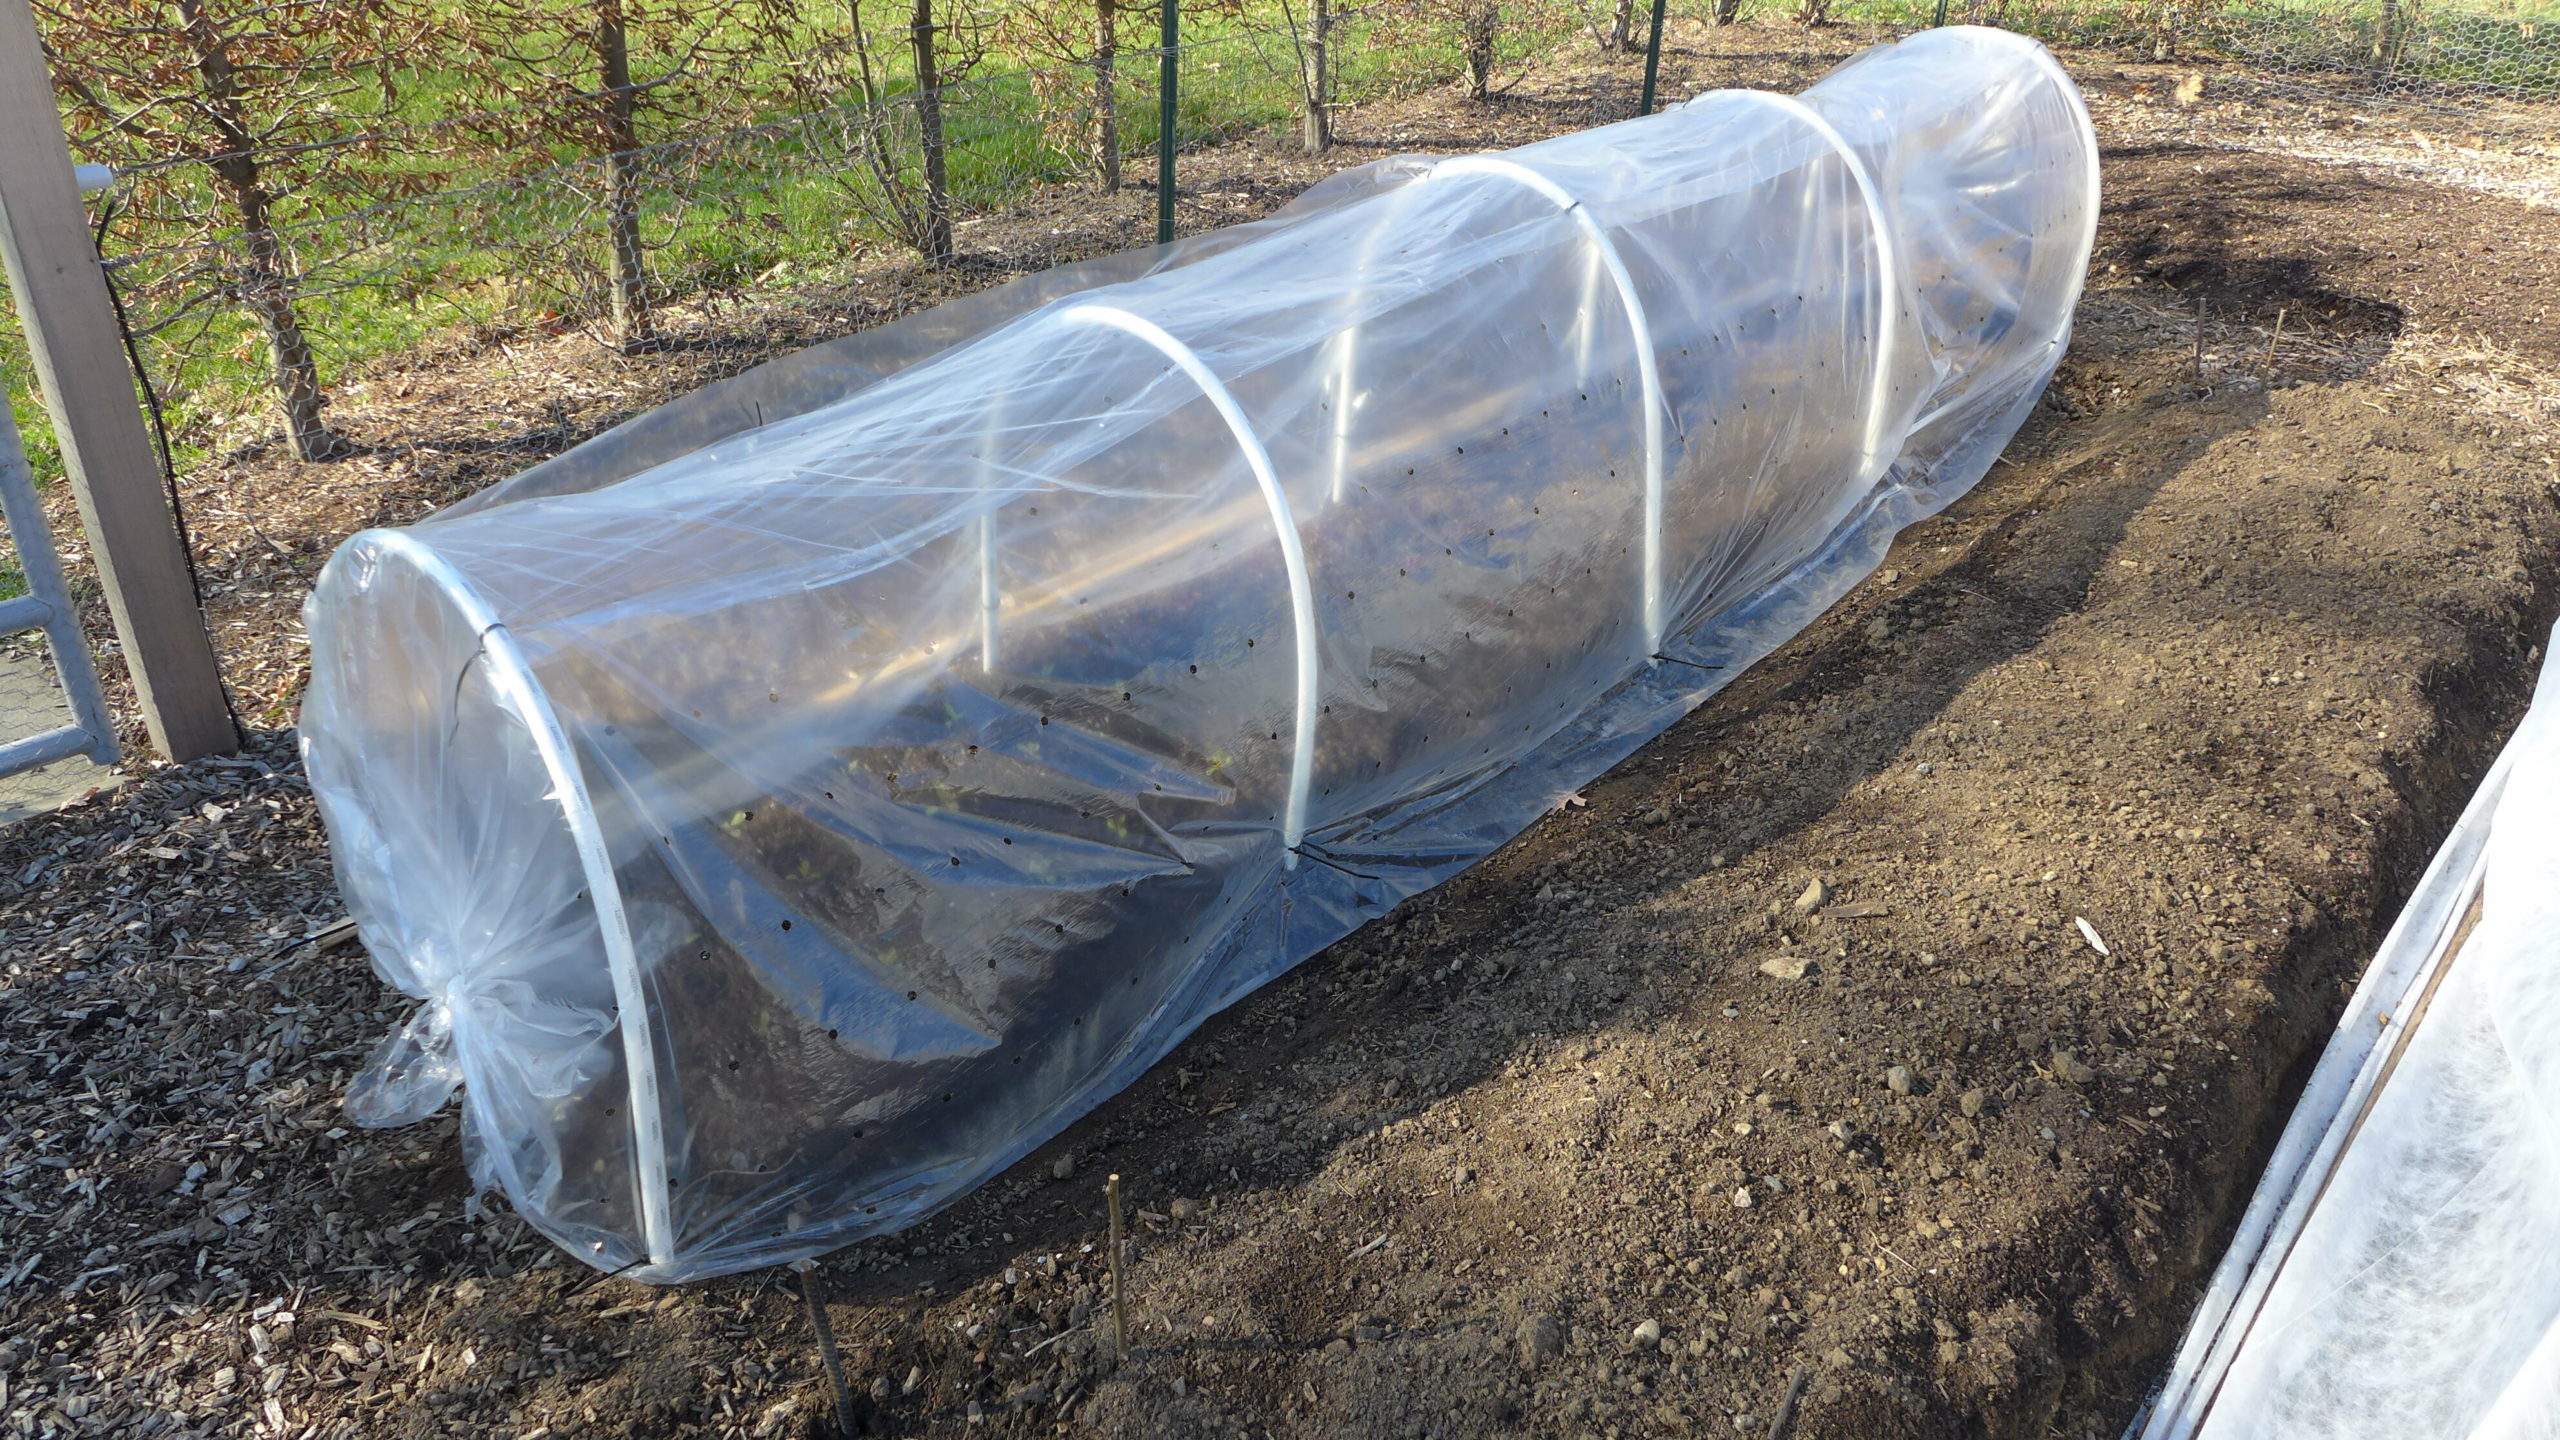 The latest variation on “colders” are low tunnels like this.  Clear poly is used as a cover and is supported by semi-rigid plastic pipes. This type of frame can get very warm in late winter and early spring and on those sunny days the two ends are opened to allow for ventilation. ANDREW MESSINGER